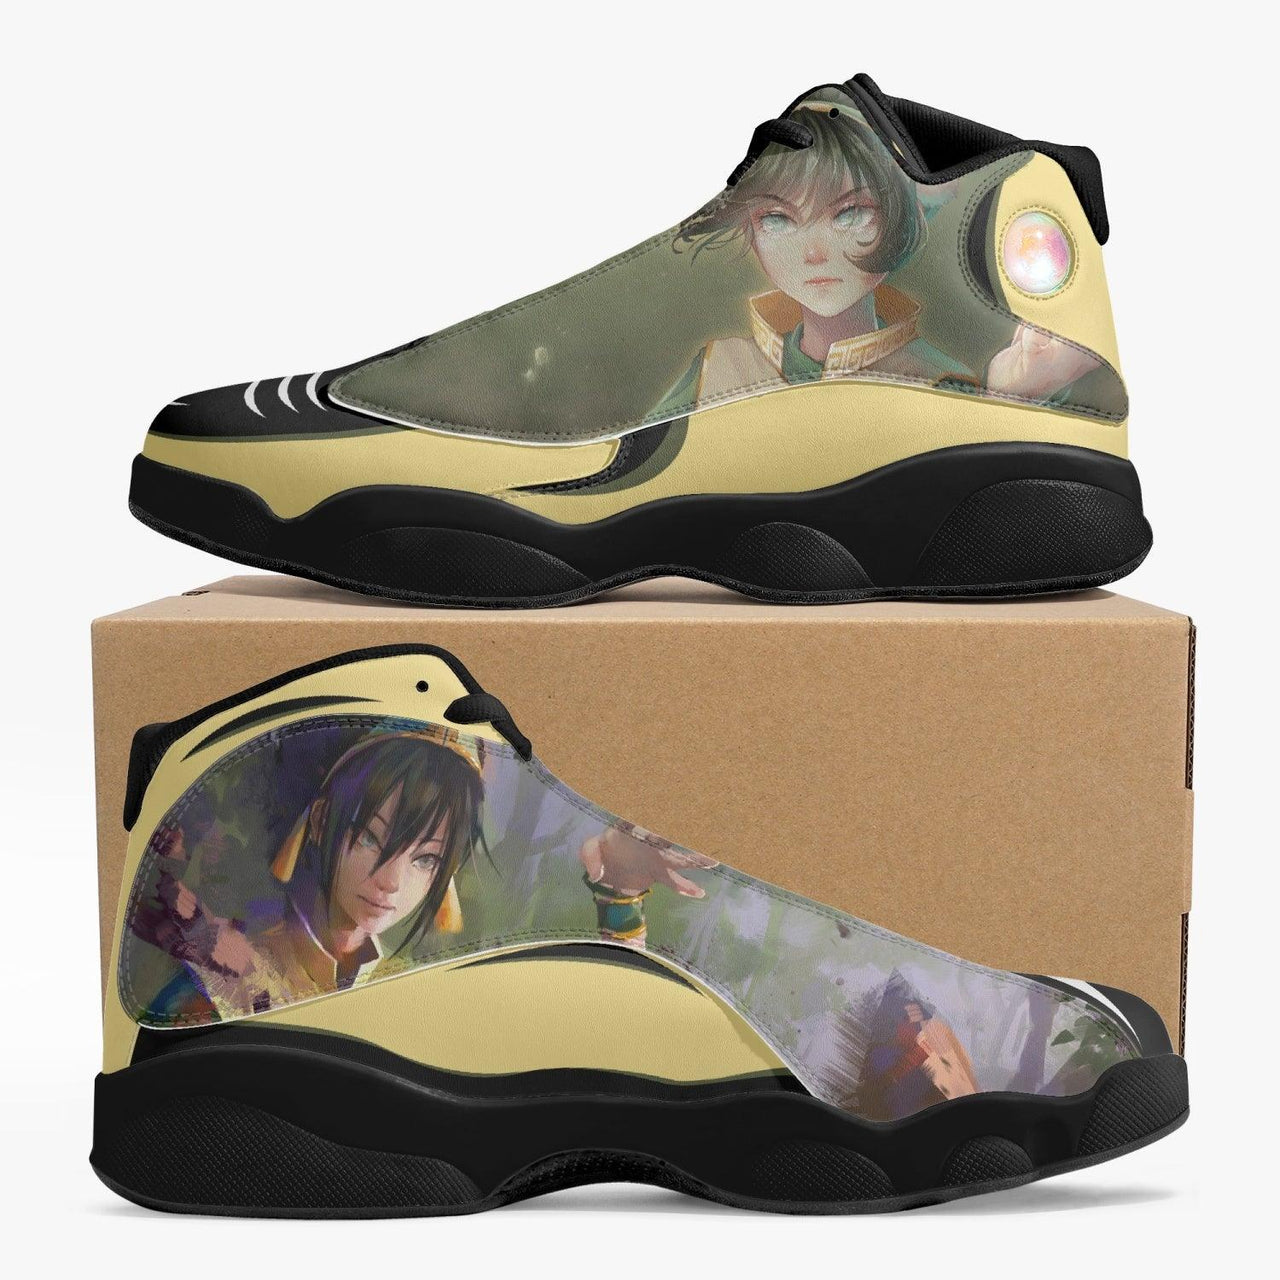 Avatar The Last Airbender Toph Beifong JD13 Anime Shoes _ Avatar The Last Airbender _ Ayuko